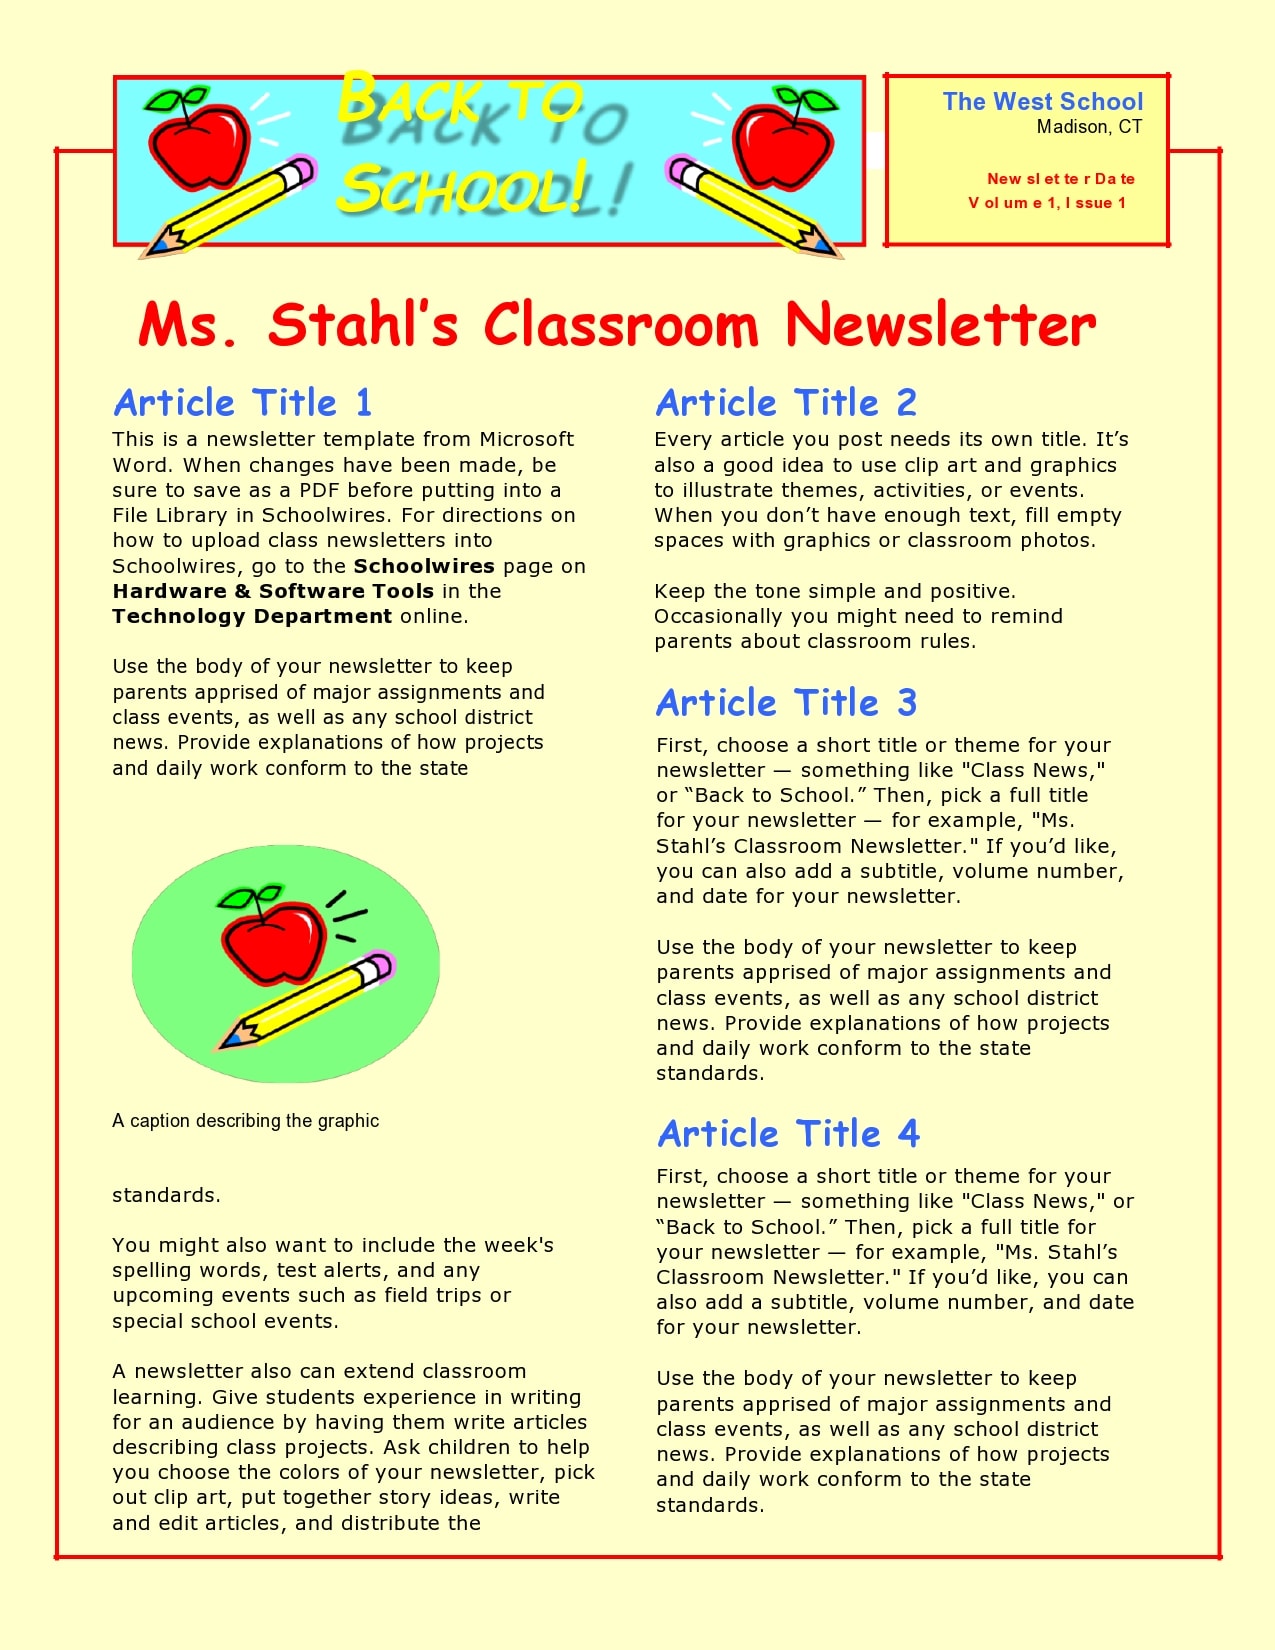 examples of newsletters for schools